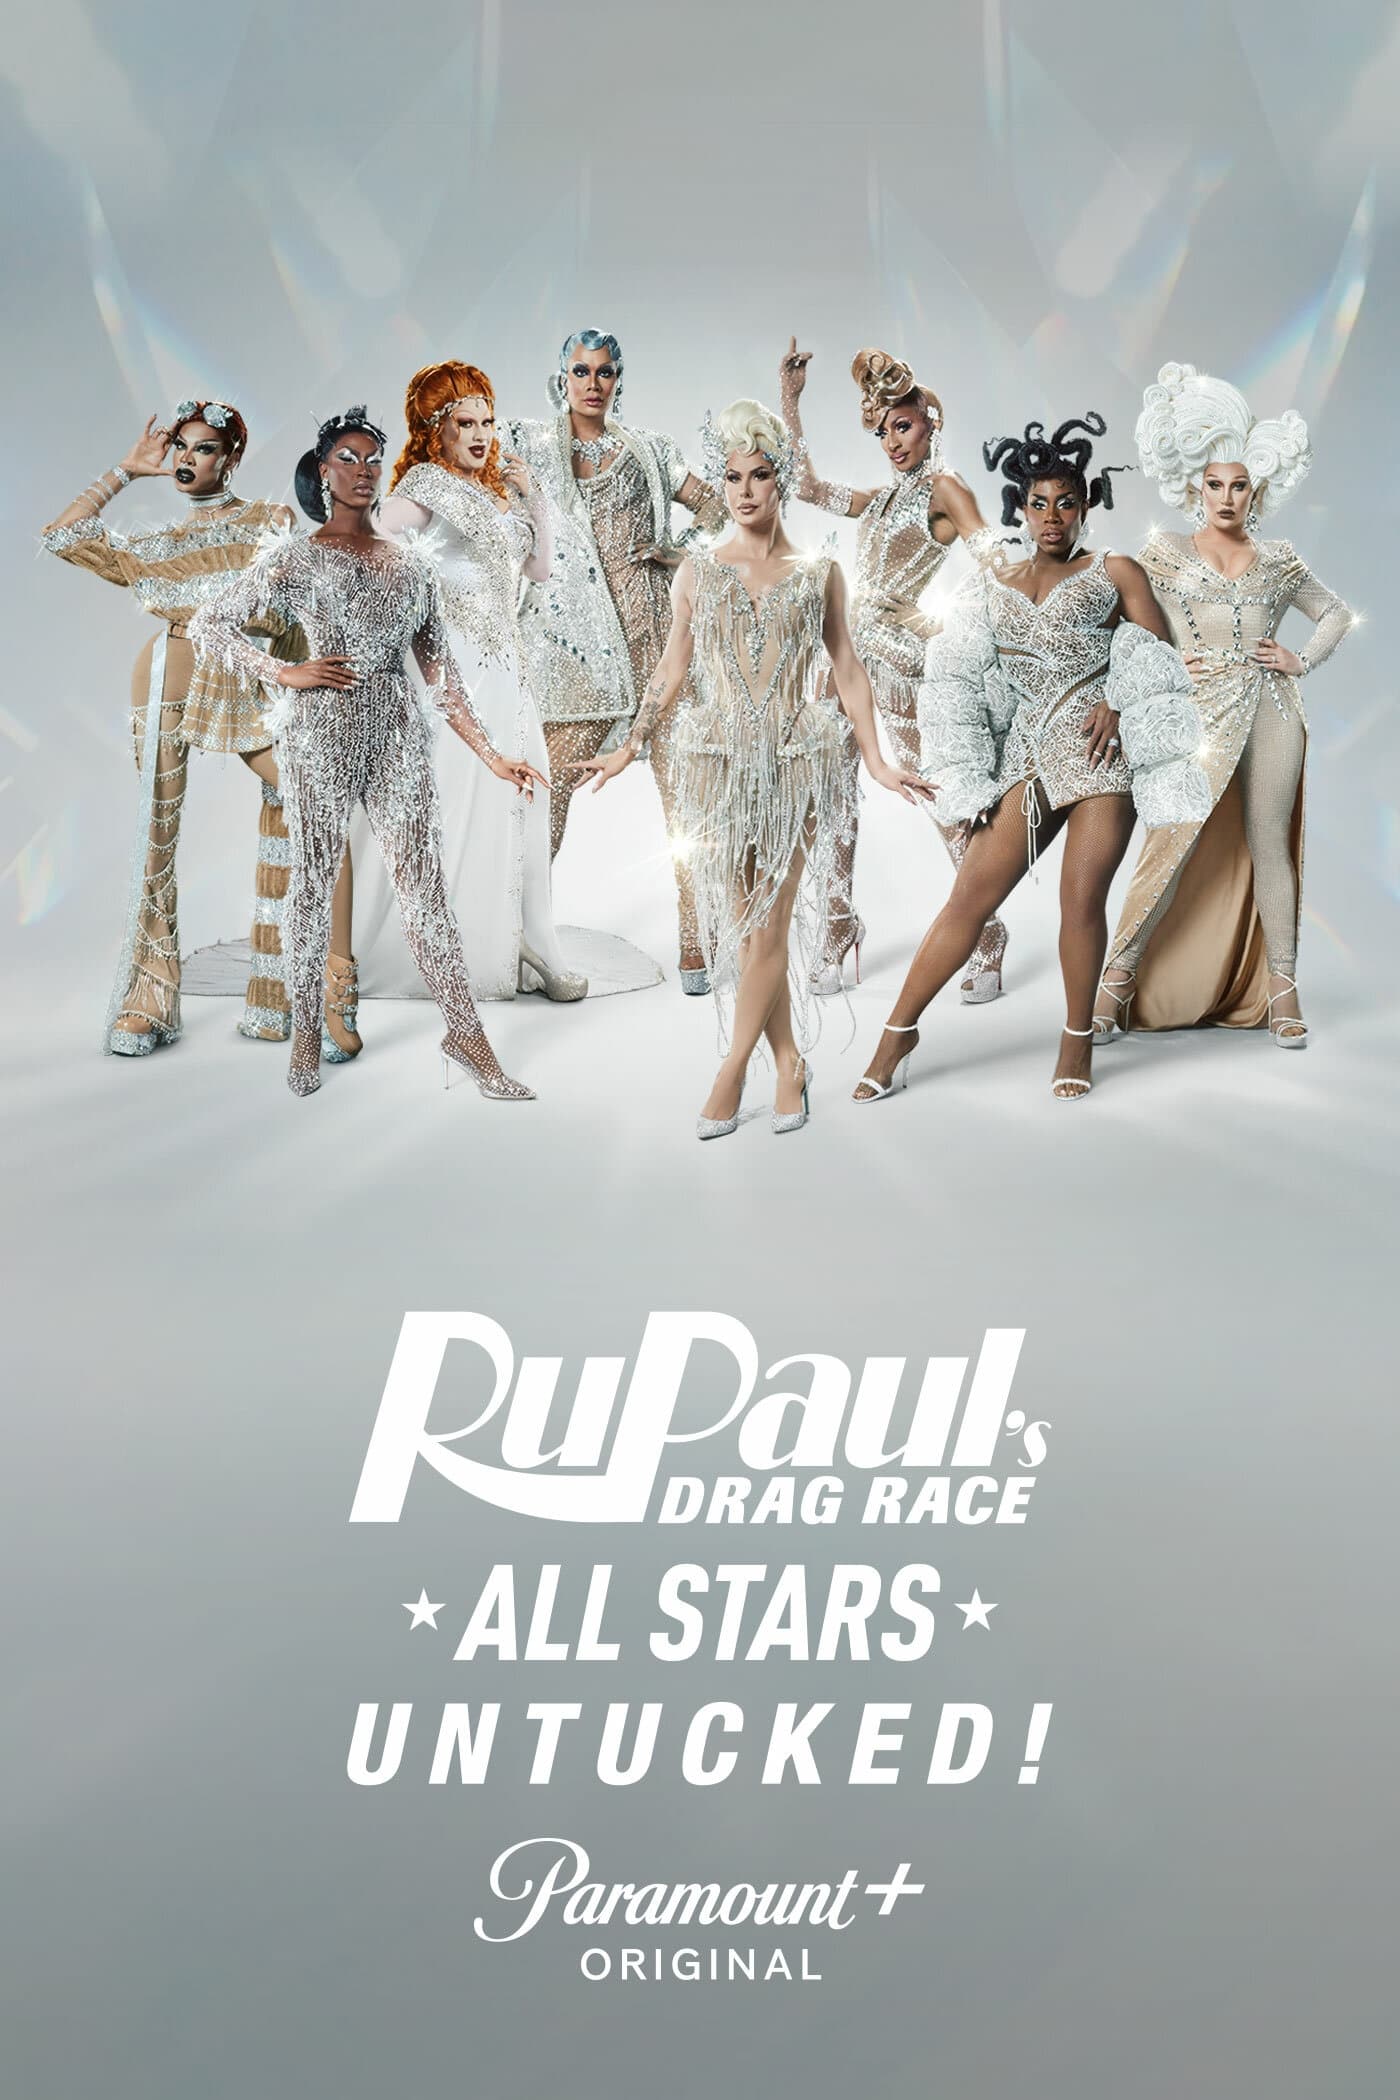 RuPaul's Drag Race All Stars: Untucked! TV Shows About Cross Dressing